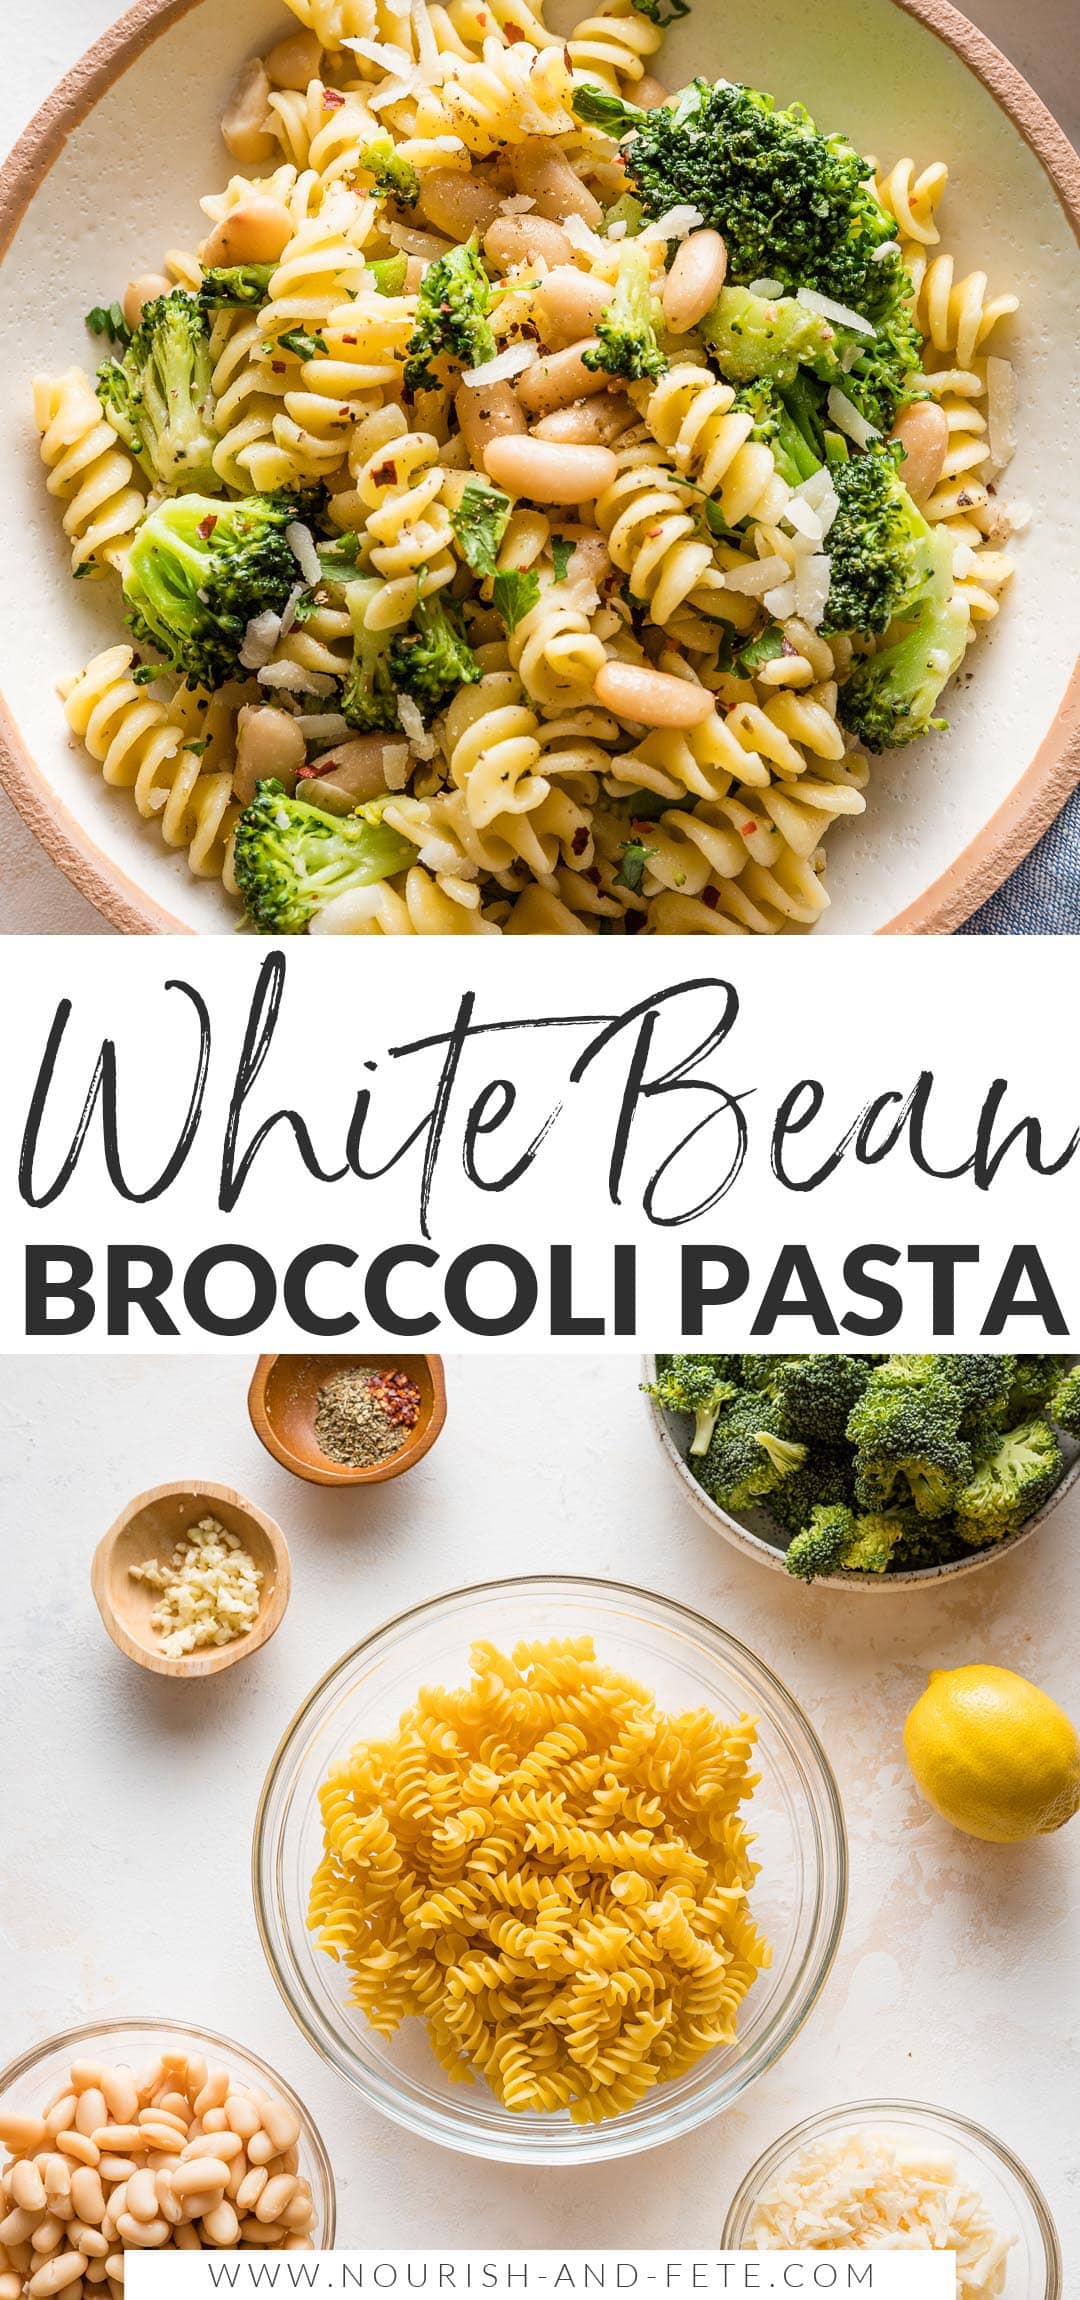 Pasta with White Beans and Broccoli - Nourish and Fete